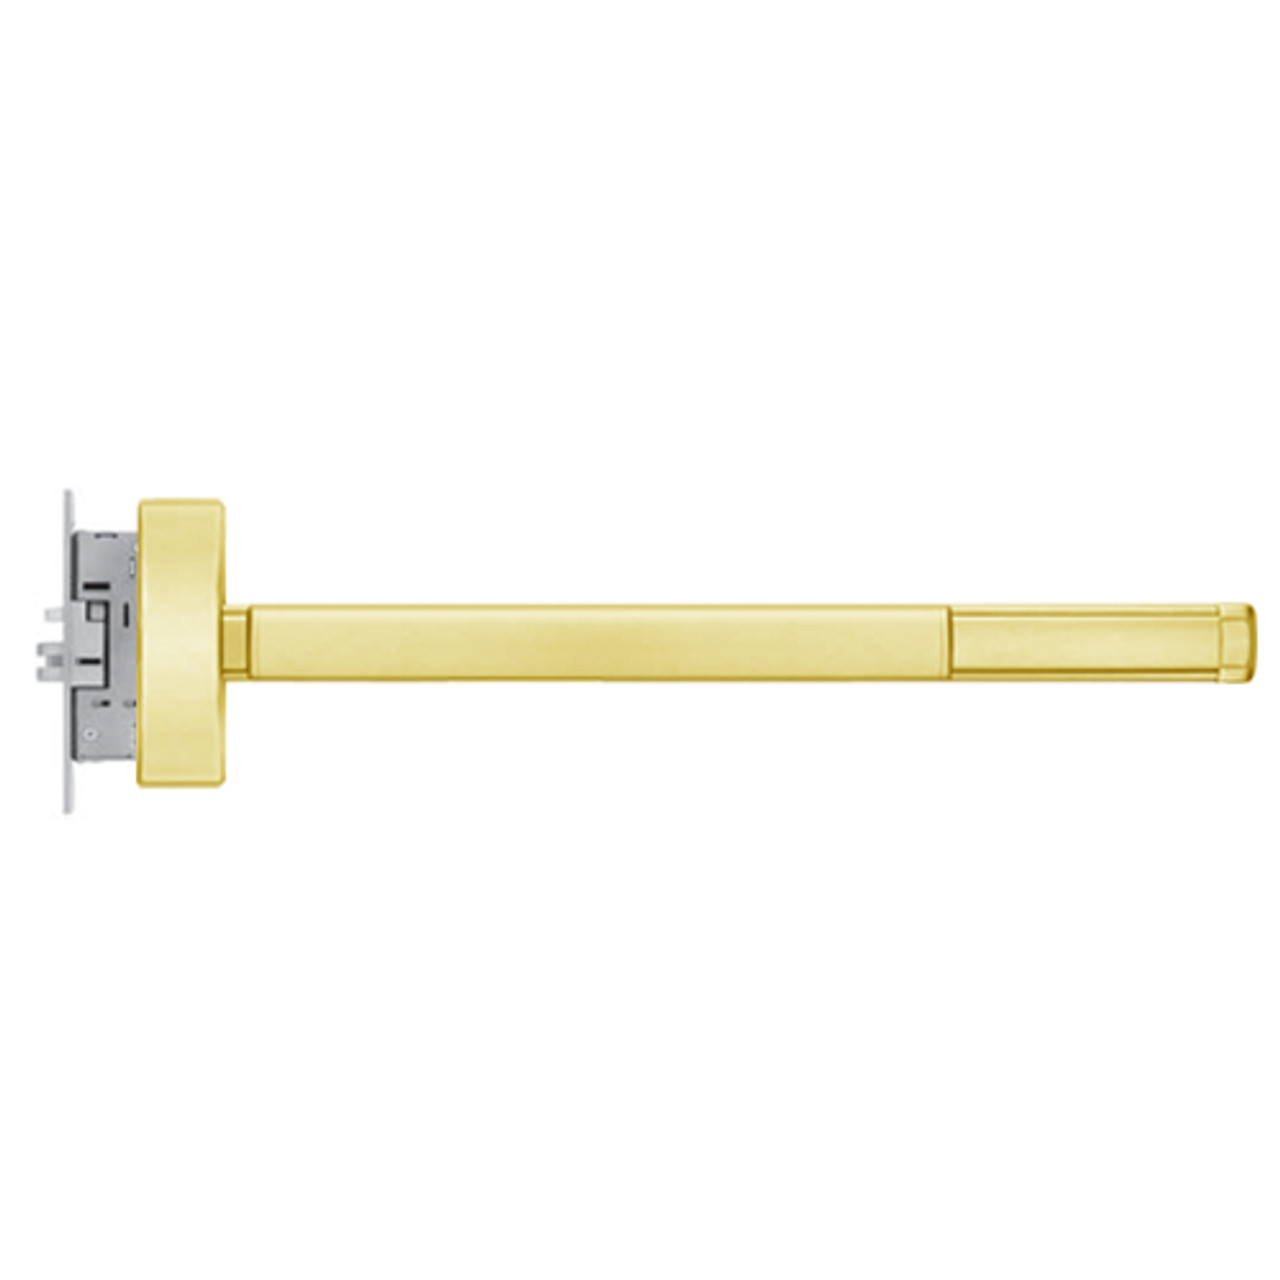 MLR2314-LHR-605-48 PHI 2300 Series Apex Mortise Exit Device with Motorized Latch Retraction Prepped for Lever-Knob Always Active in Bright Brass Finish